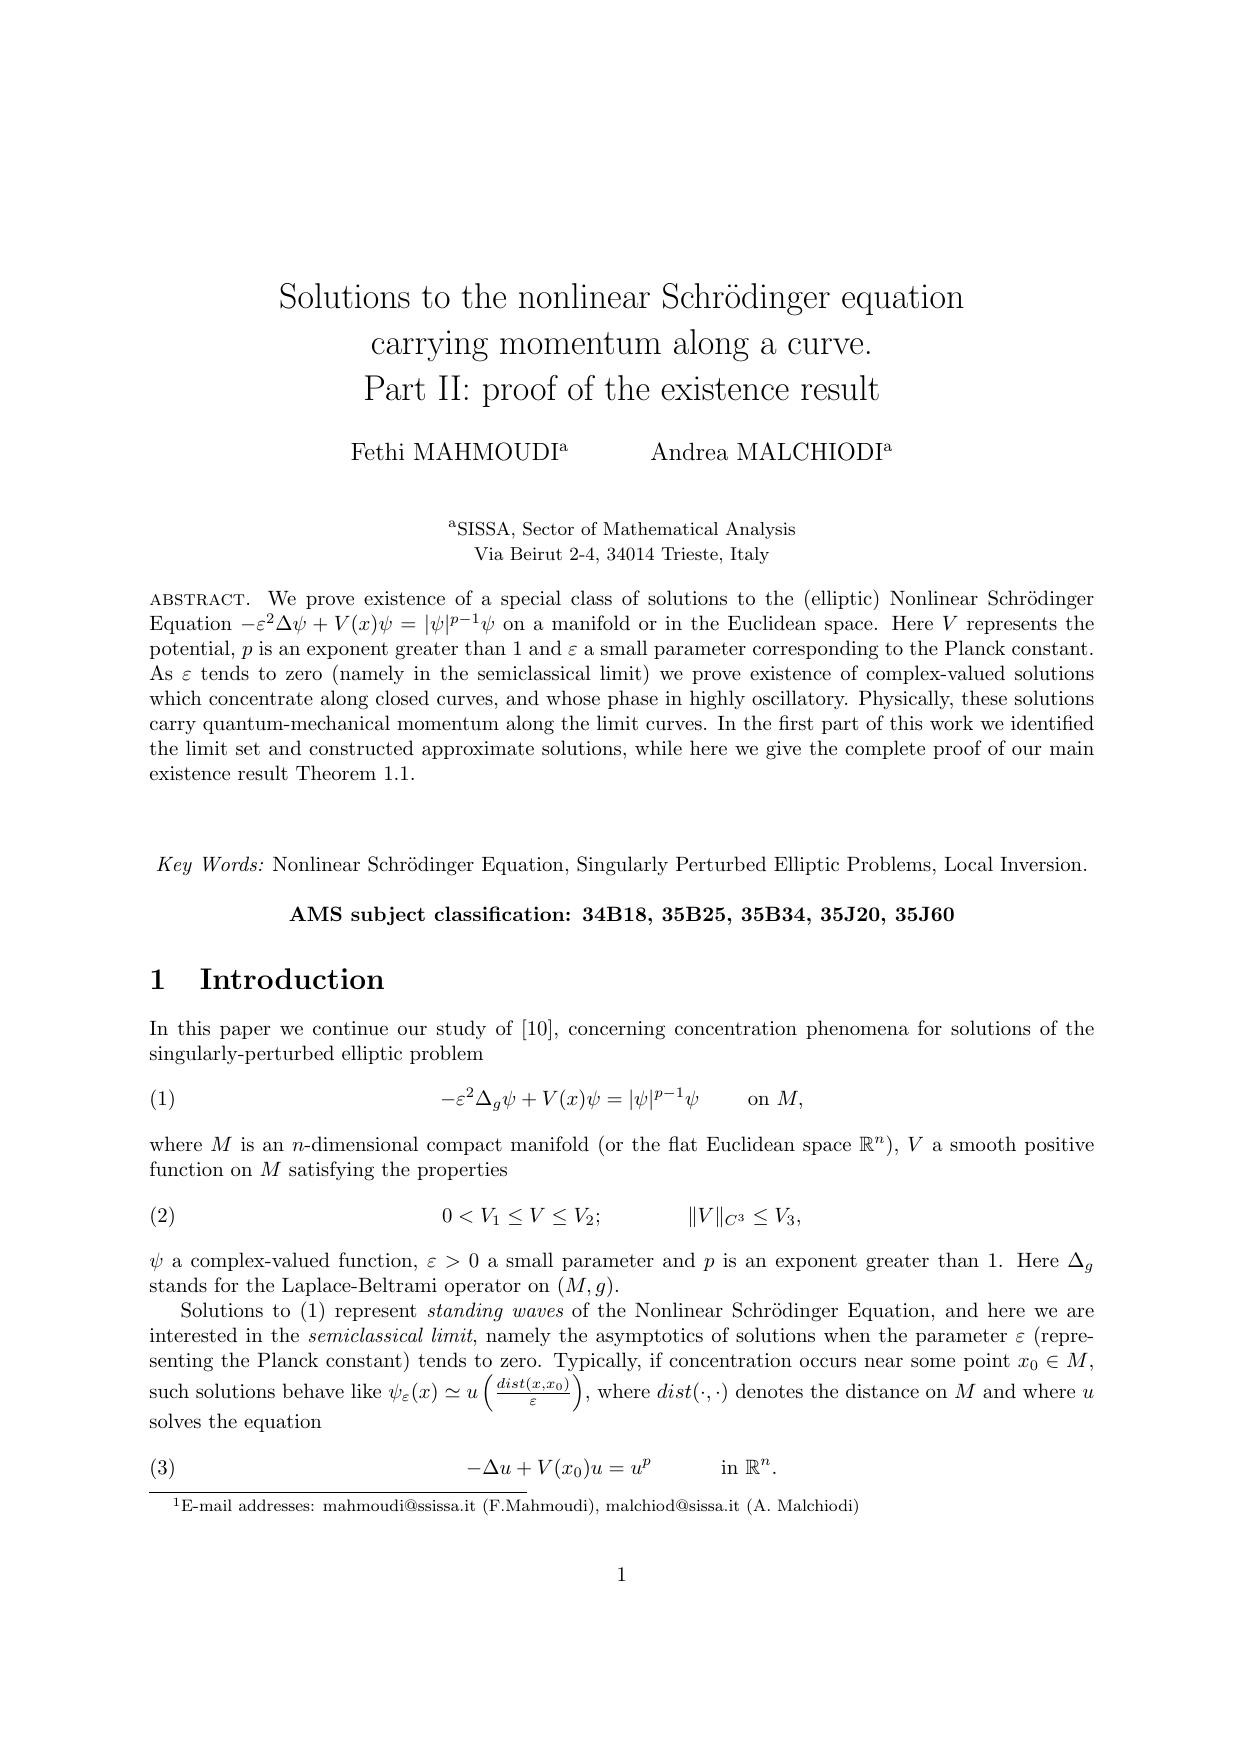 Solutions to the nonlinear Schrodinger equation carrying momentum along a curve. proof of the existence result - Paper